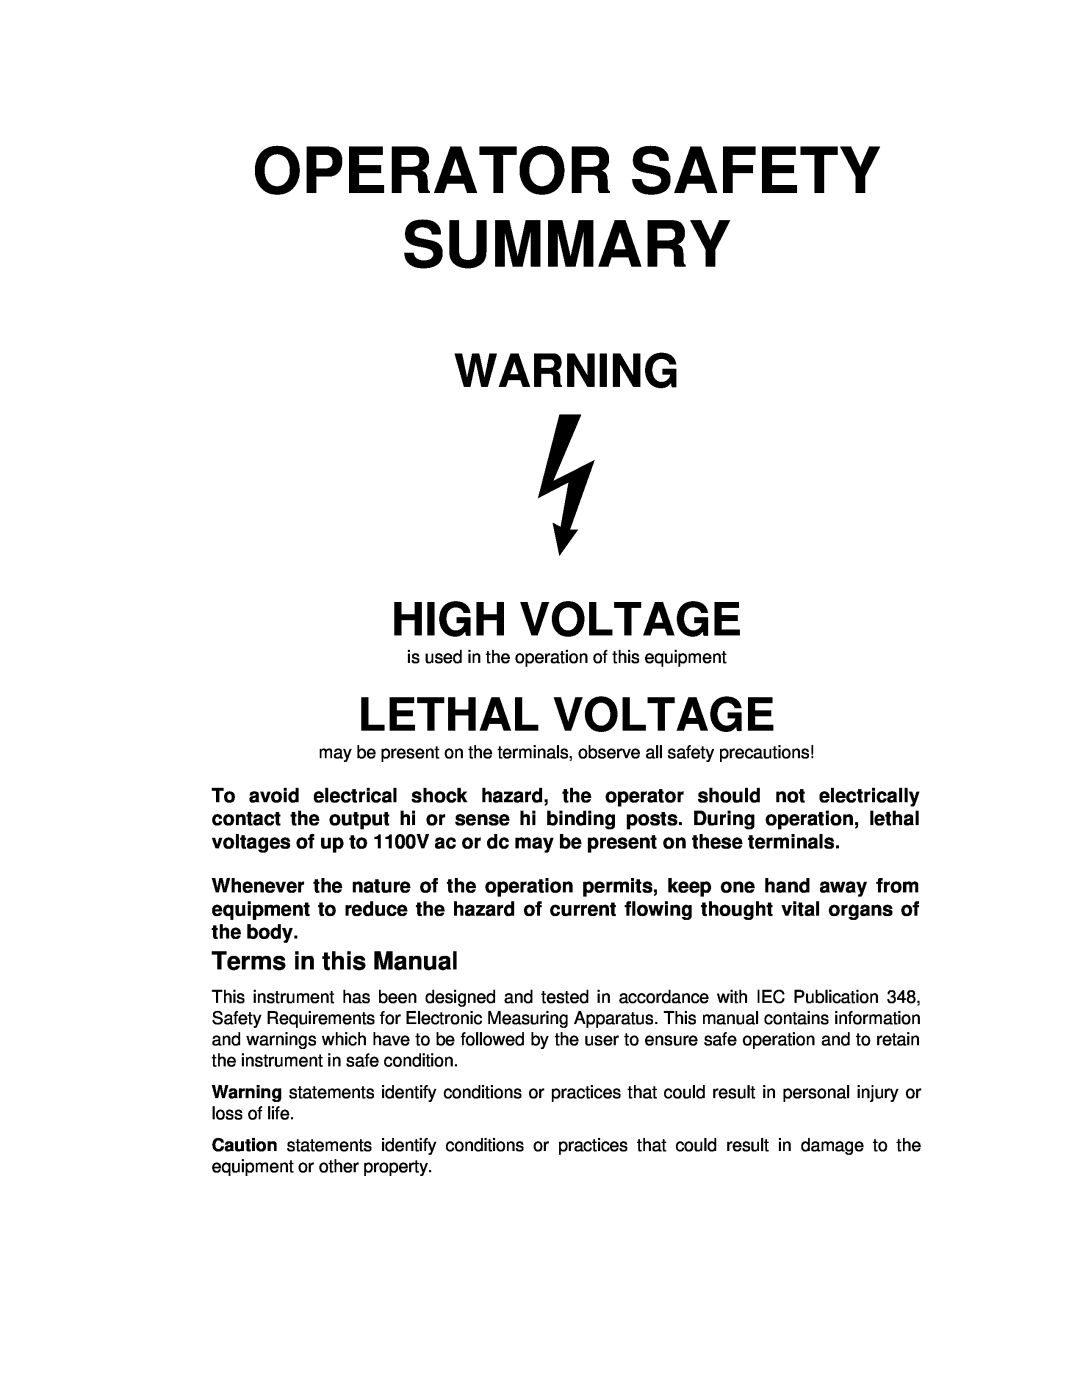 Fluke 5725A instruction manual Operator Safety Summary, High Voltage, Lethal Voltage, Terms in this Manual 